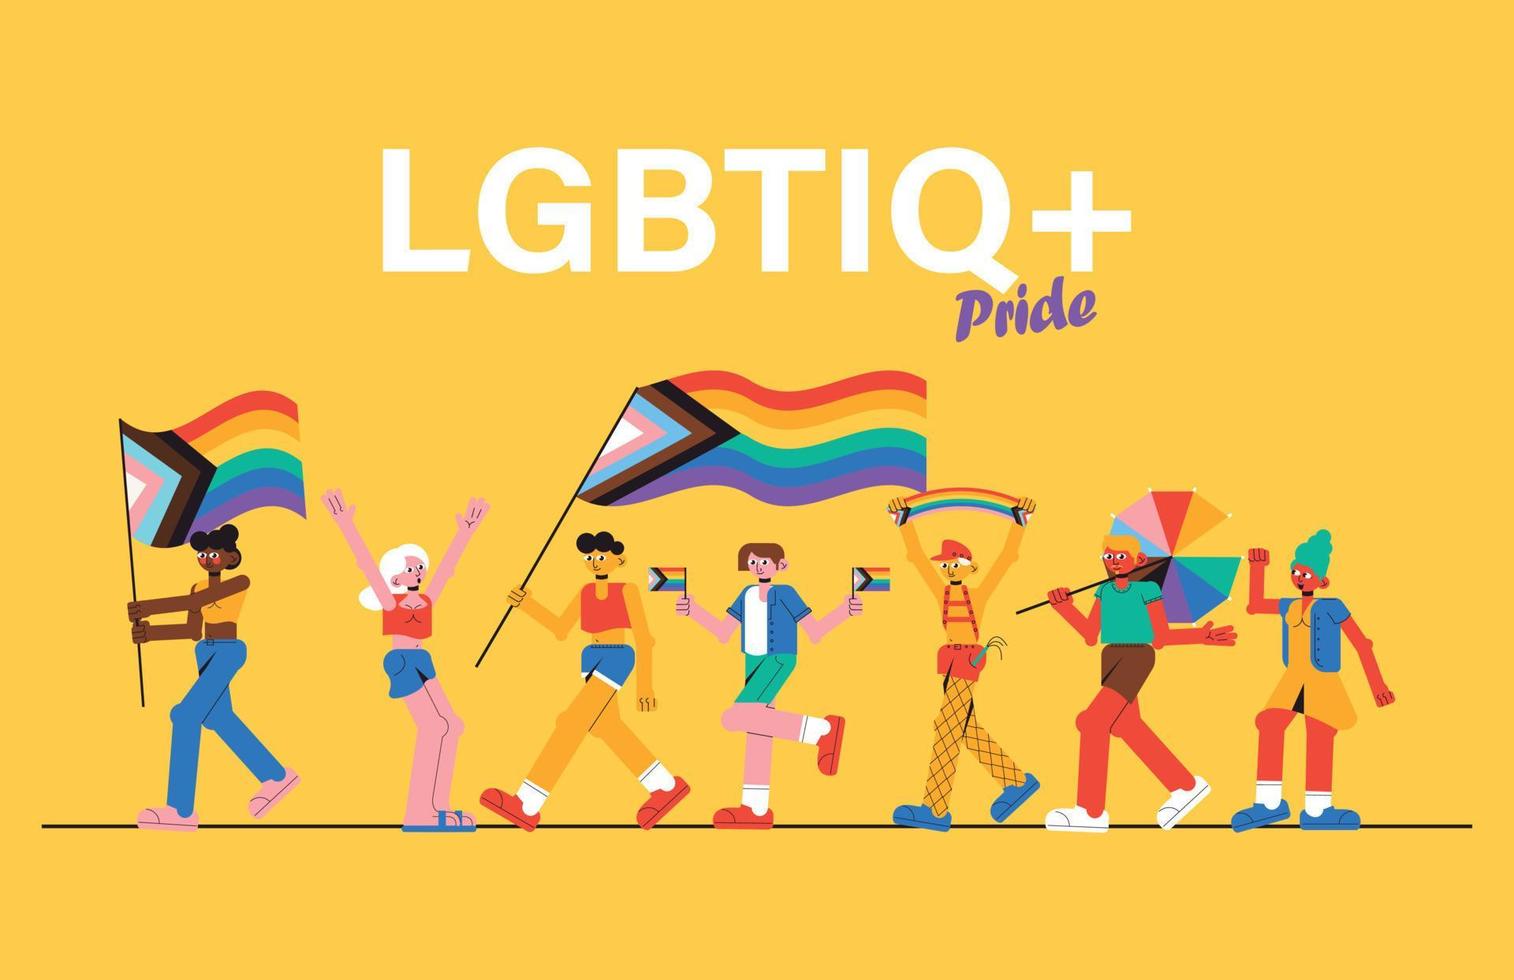 LGTBQ pride - parade yellow banner background vector